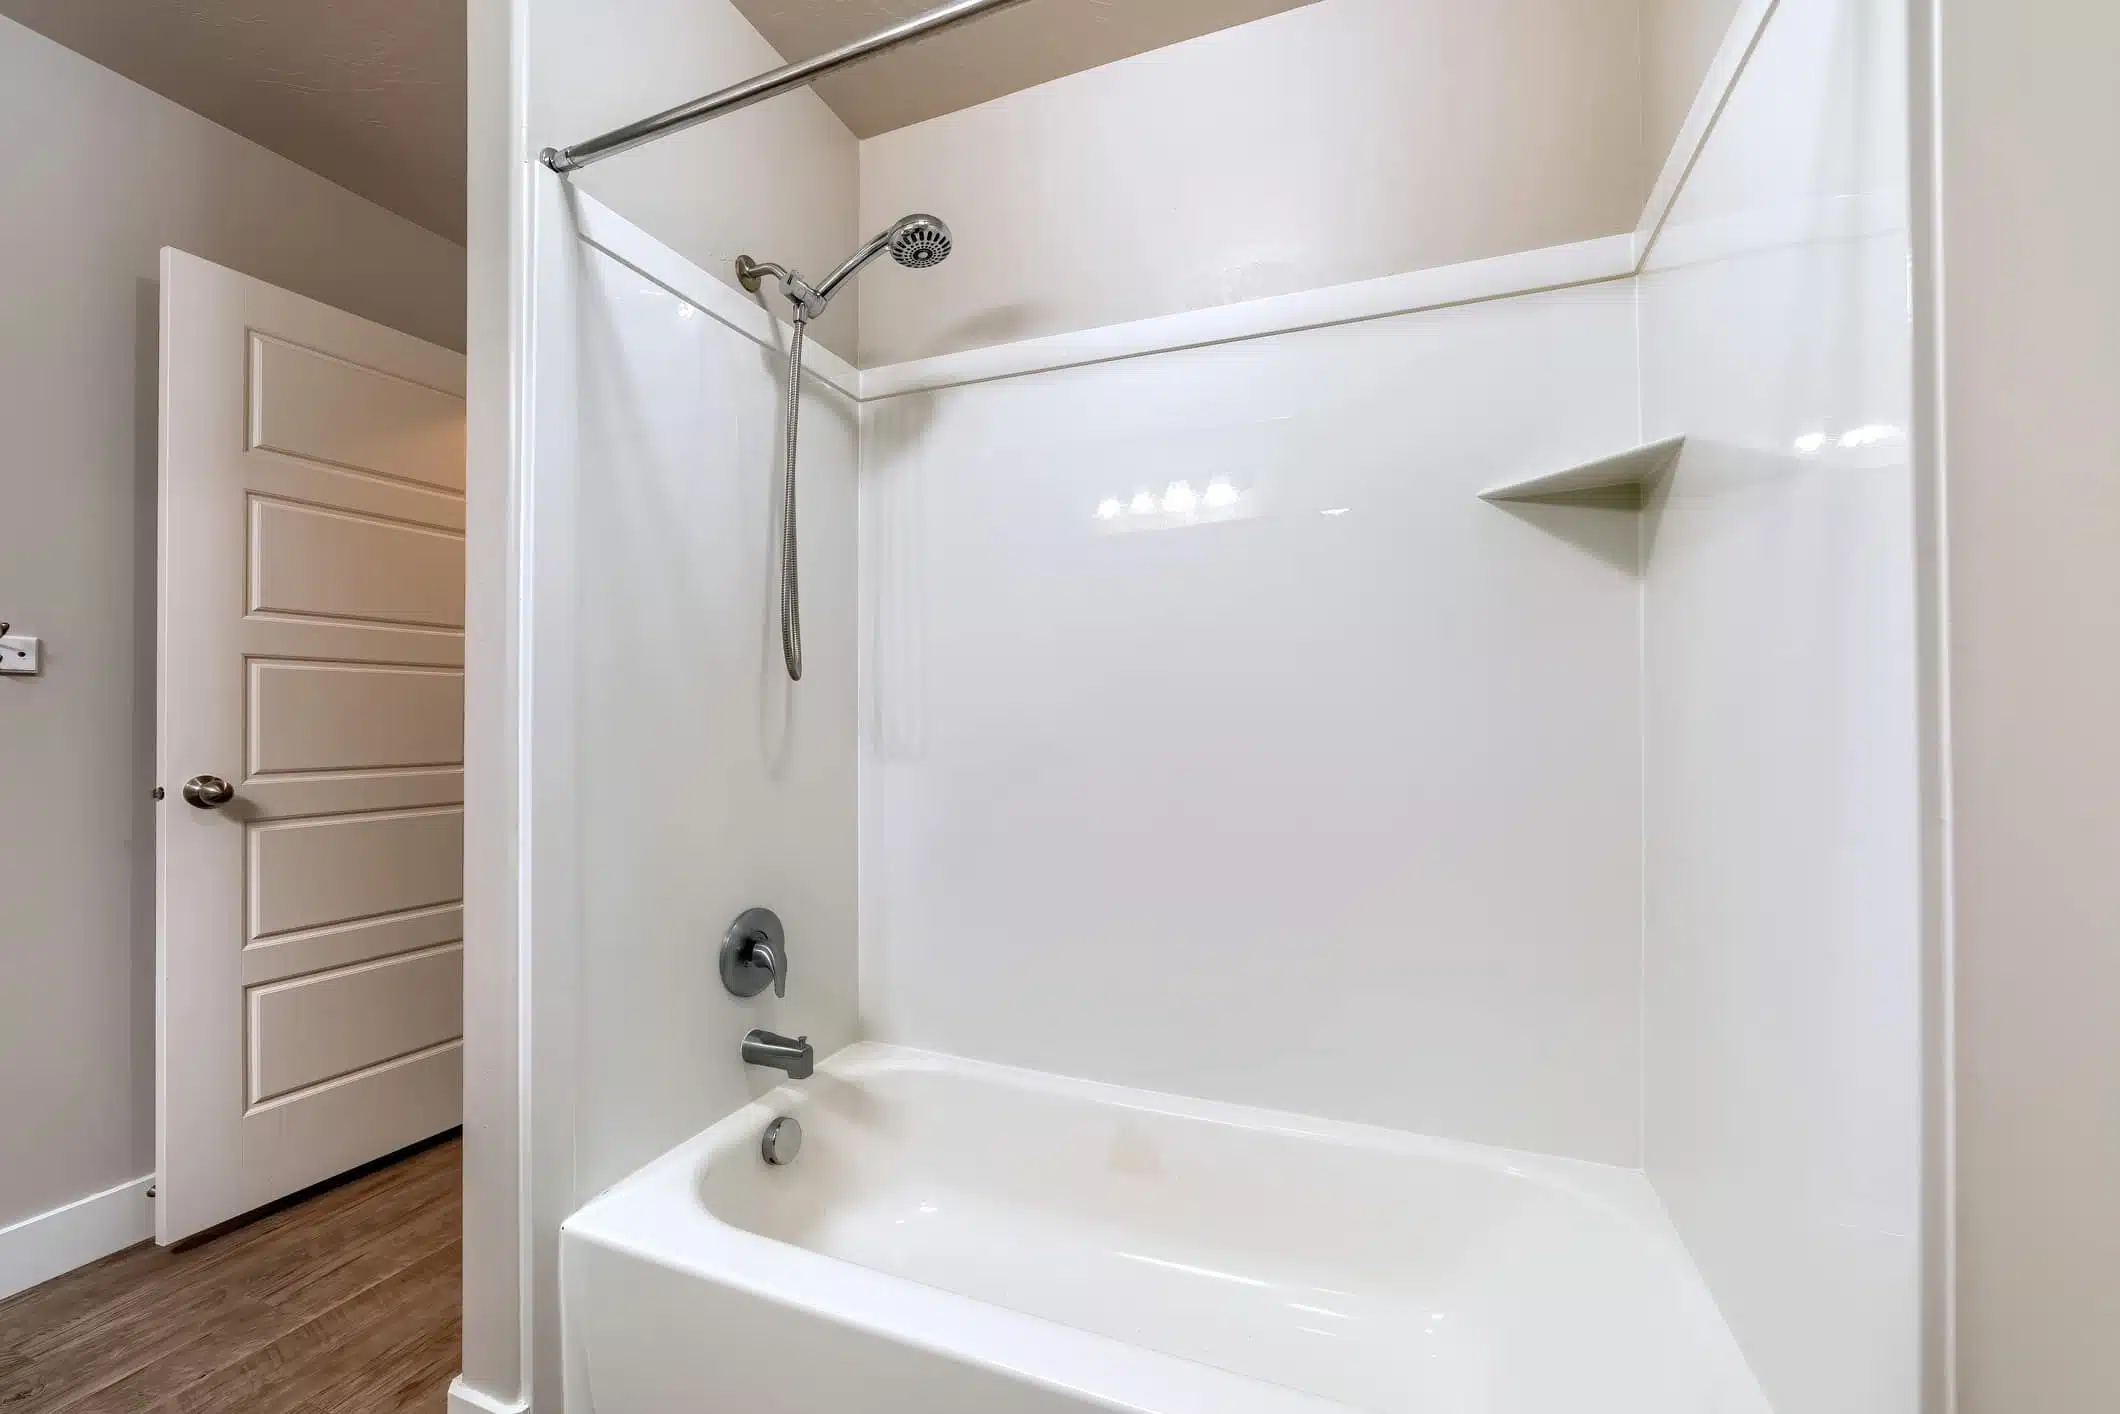 image of a white bathtub that is slippery and before a non slip product from Slip No More is applied